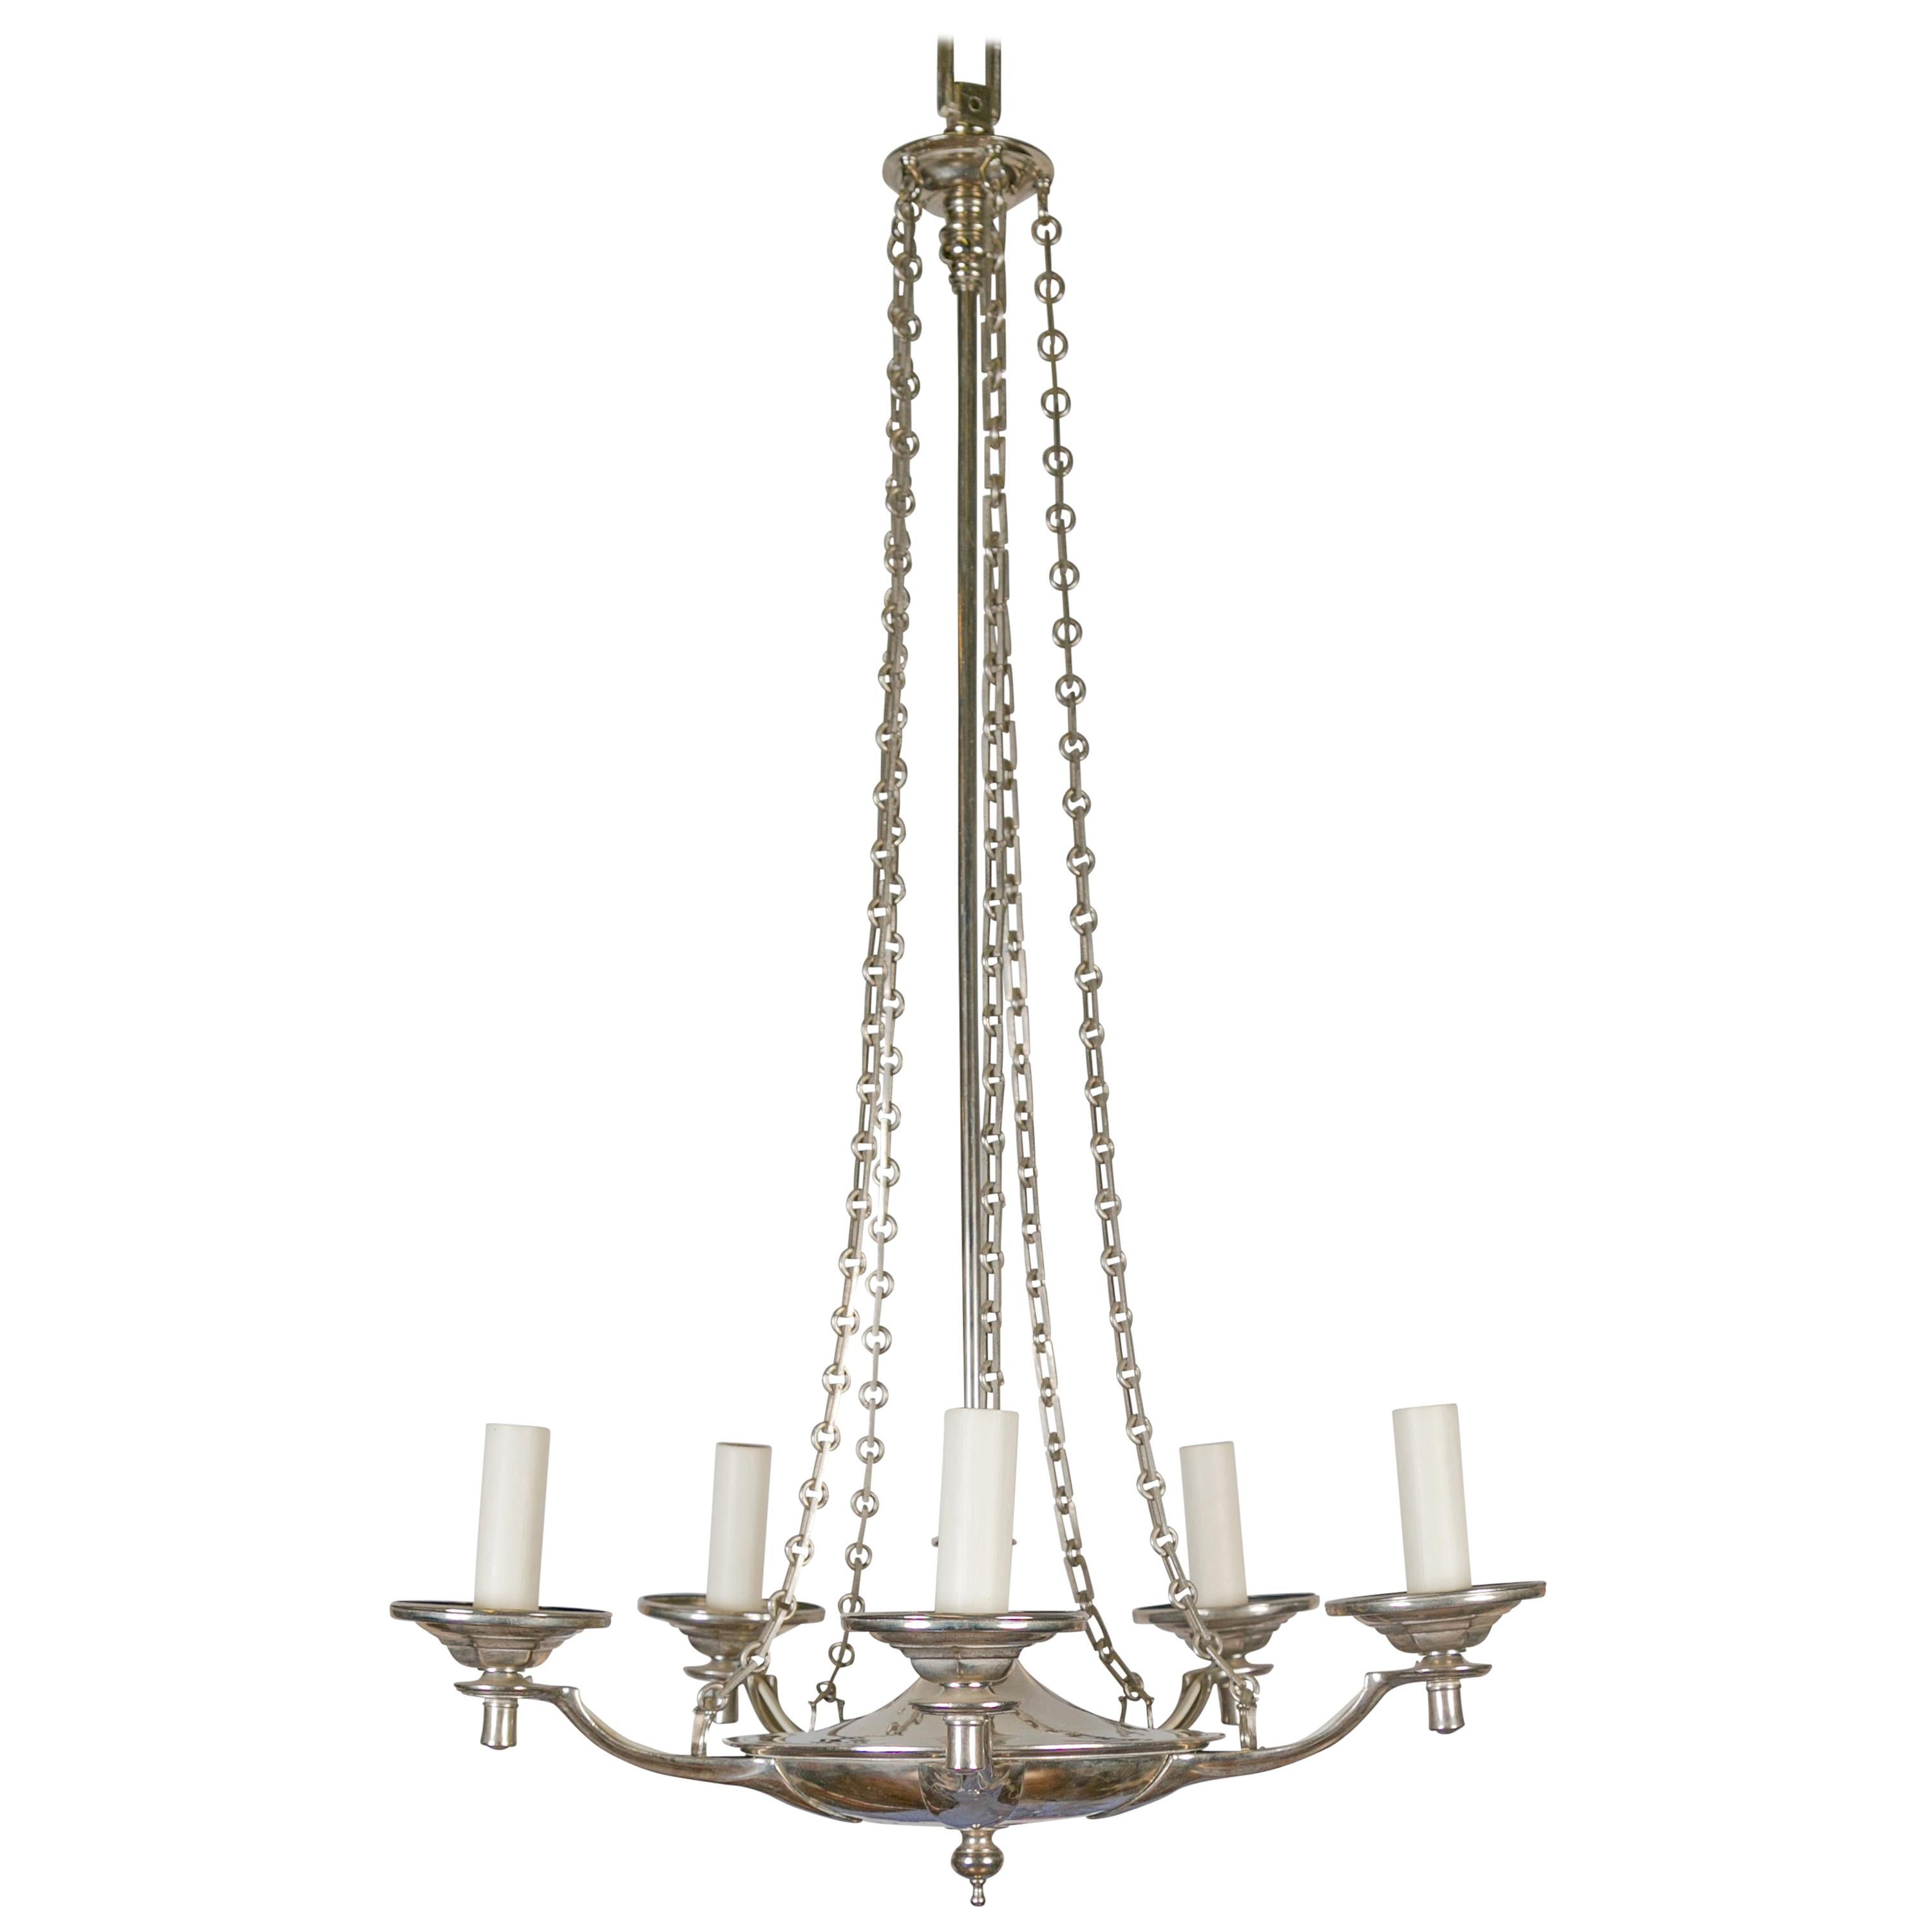 English Vintage Five-Light Nickel Chandelier with Profiled Links, circa 1970 For Sale